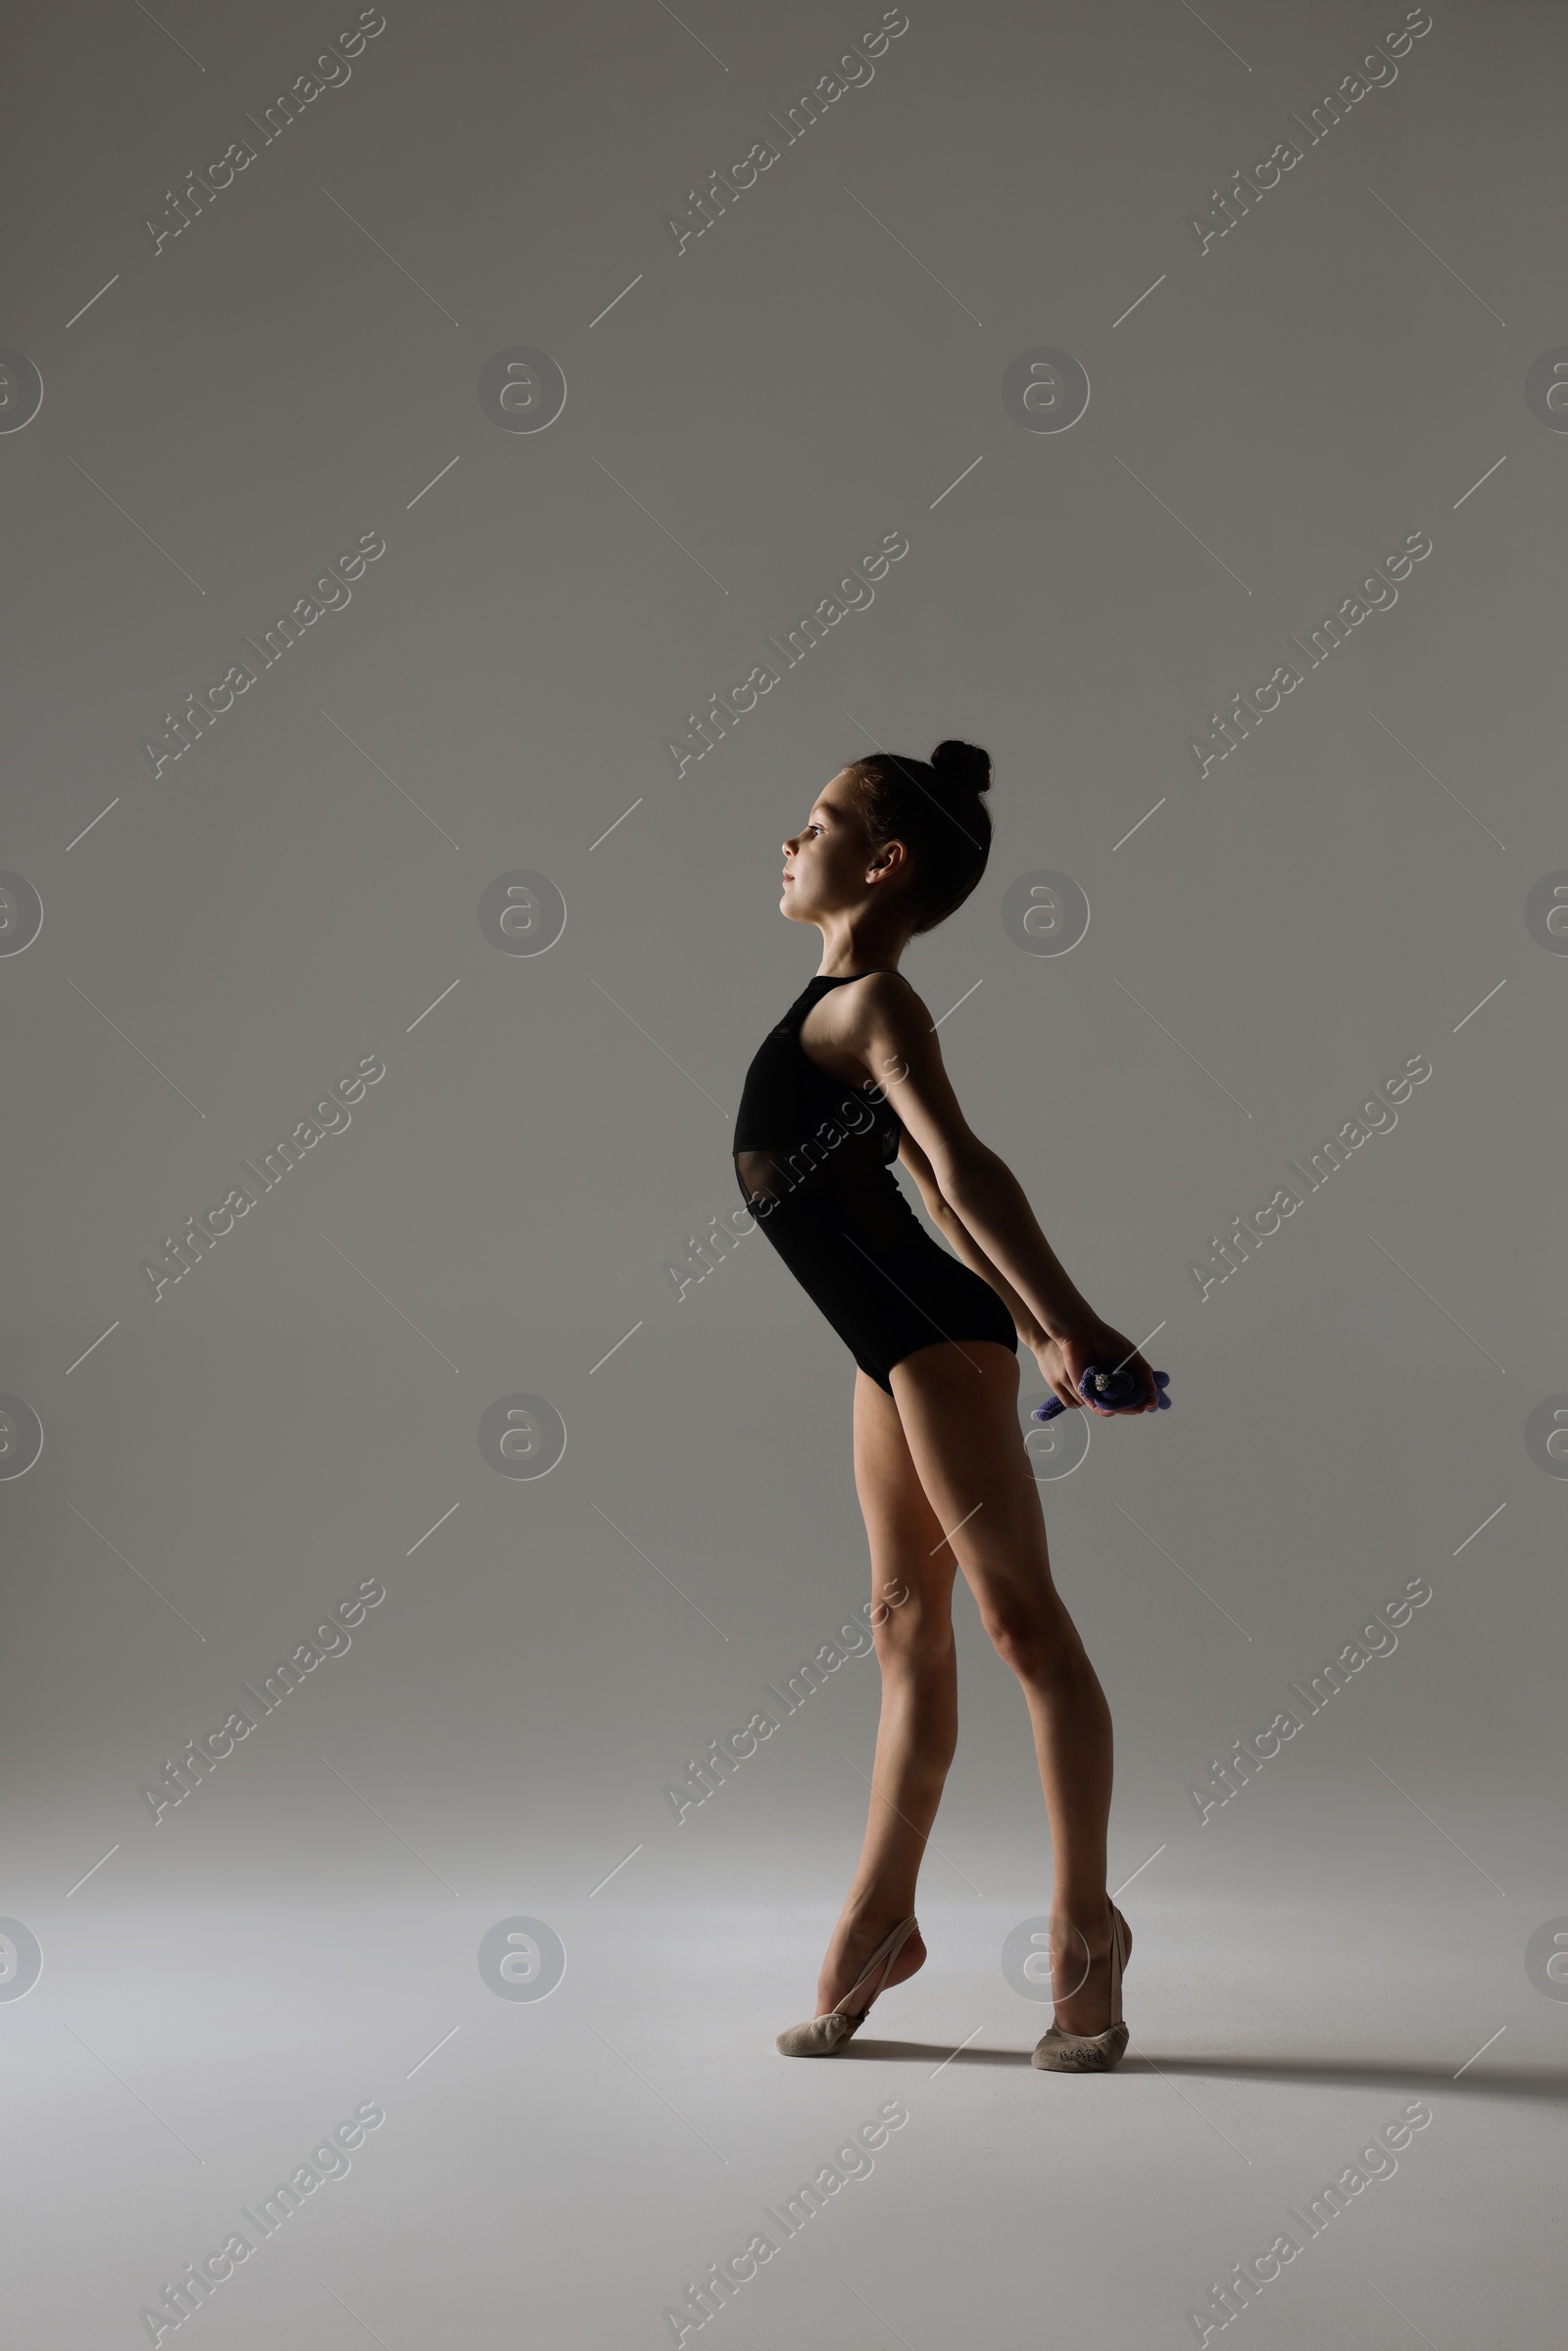 Photo of Cute little girl doing gymnastic exercise with rope on white background